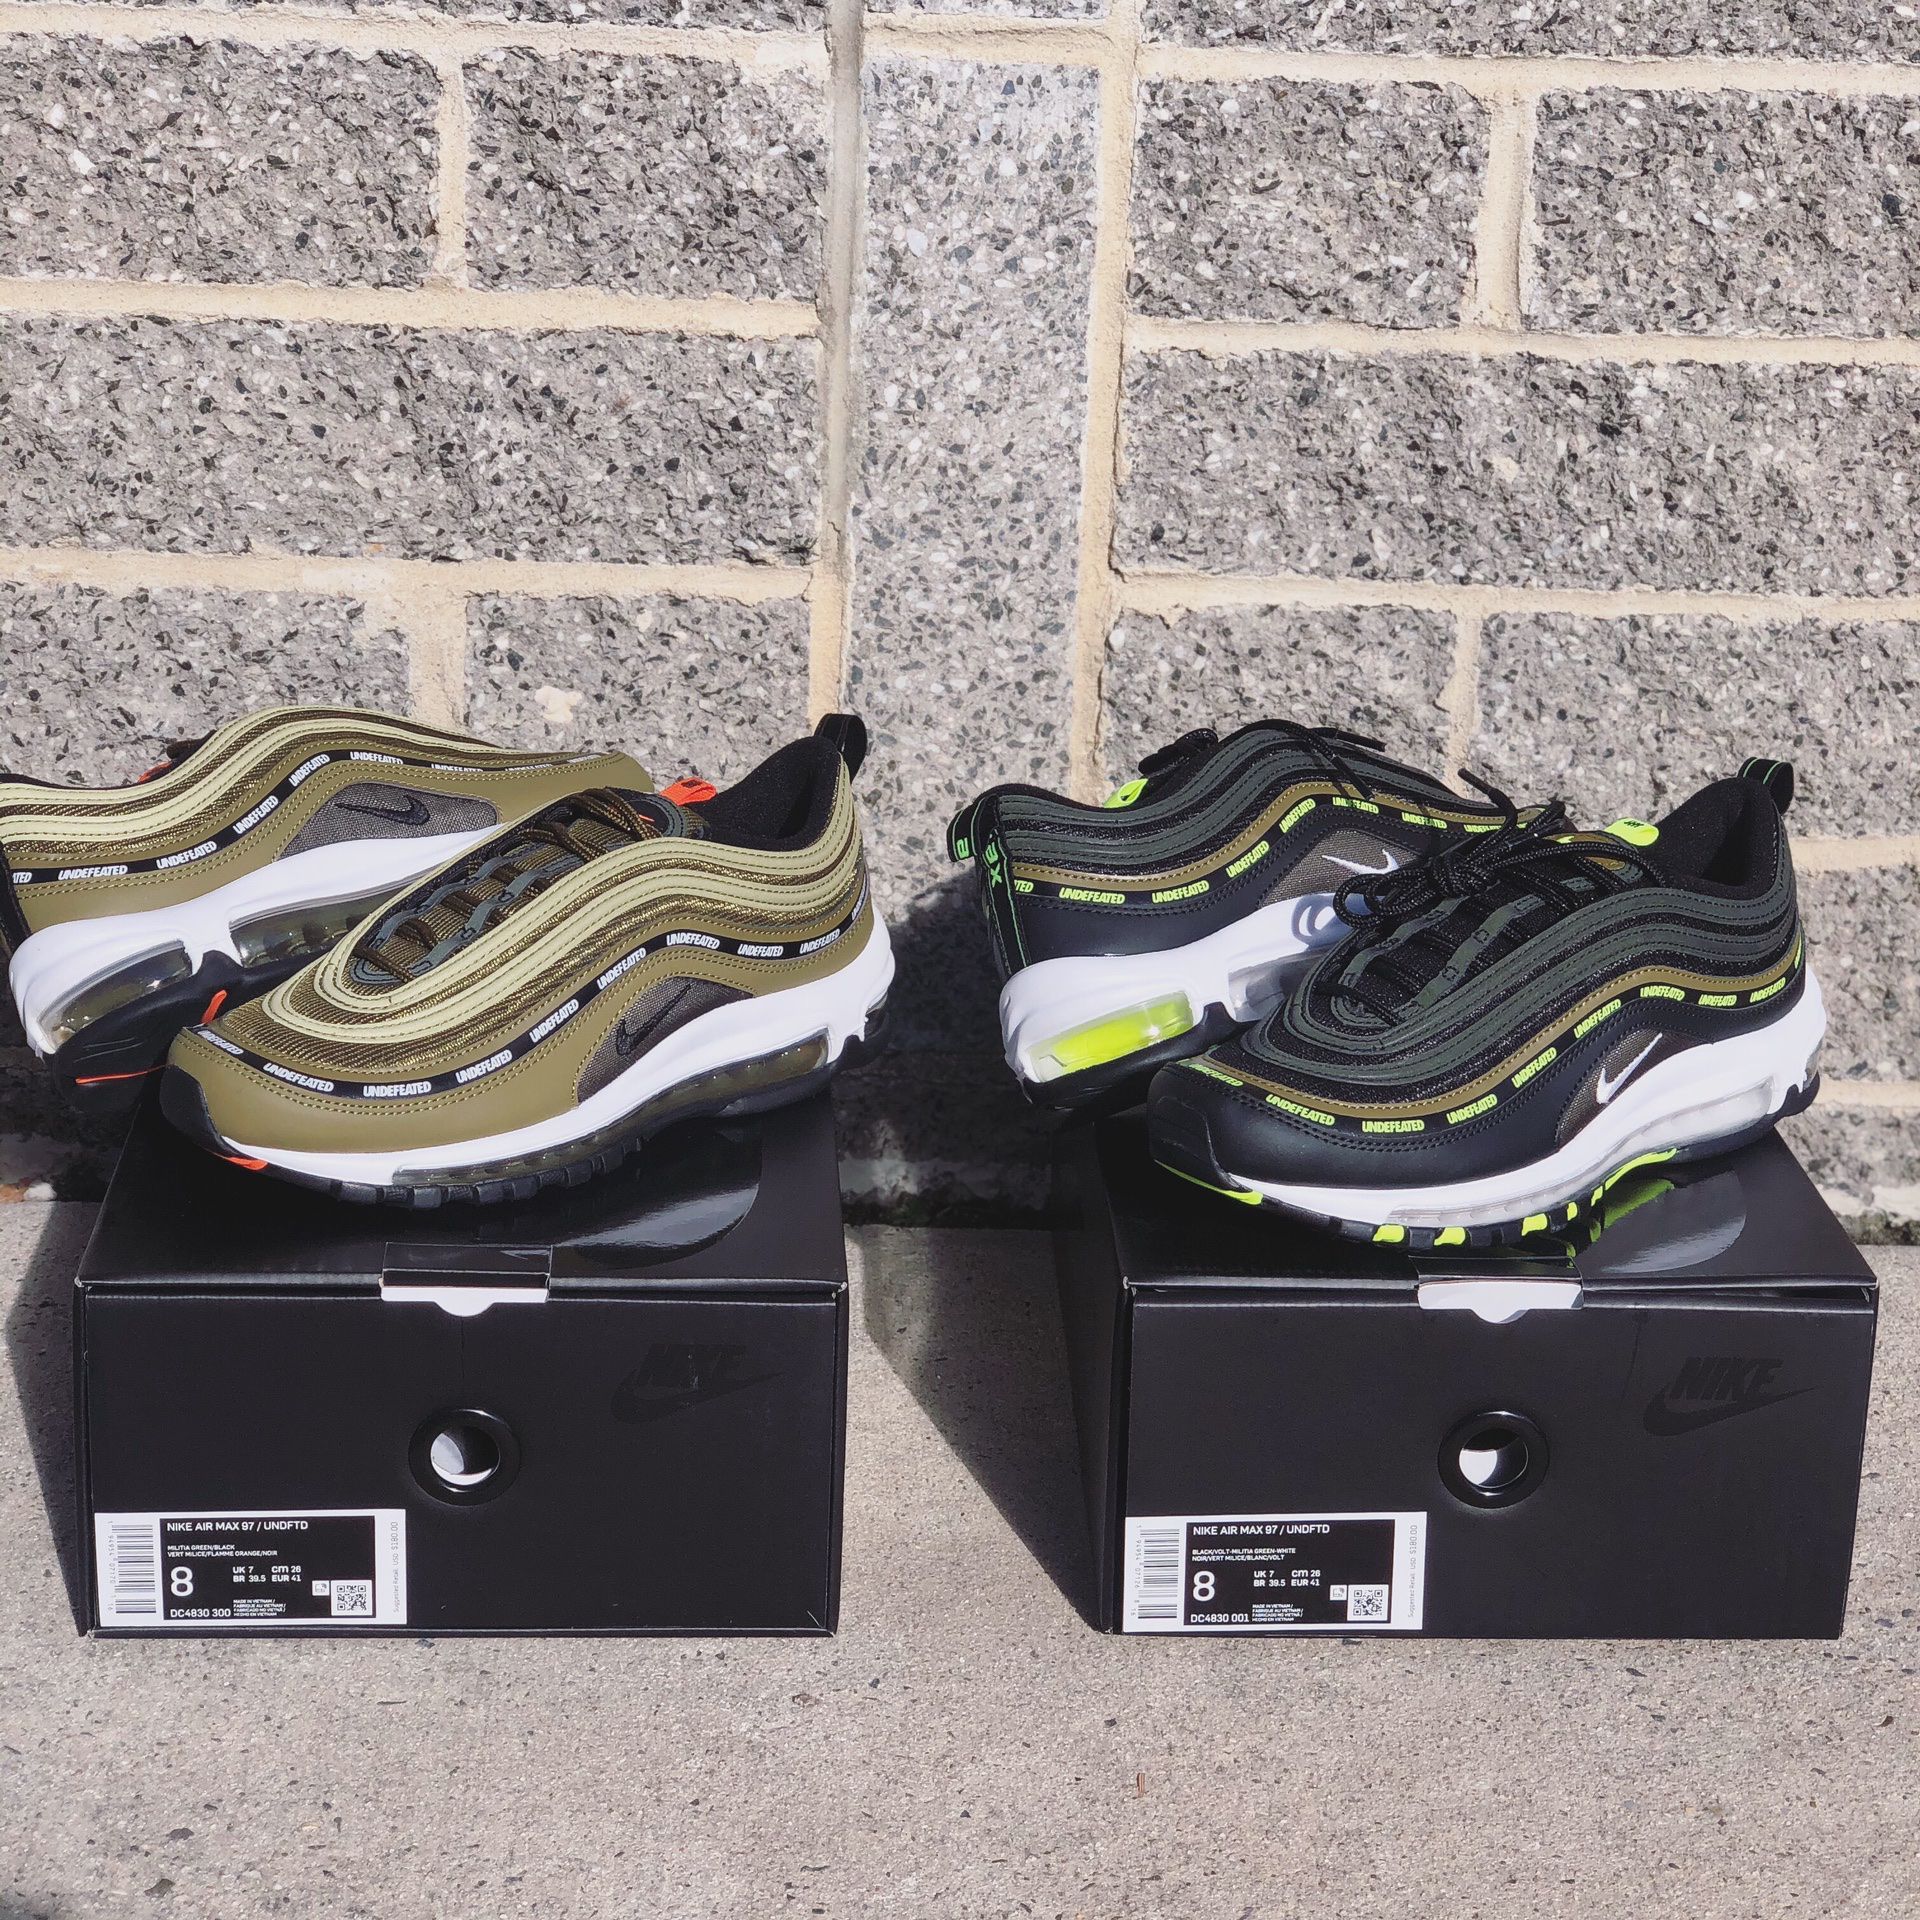 Nike air Max 97 X Undefeated Collab Size 8 $200 Each